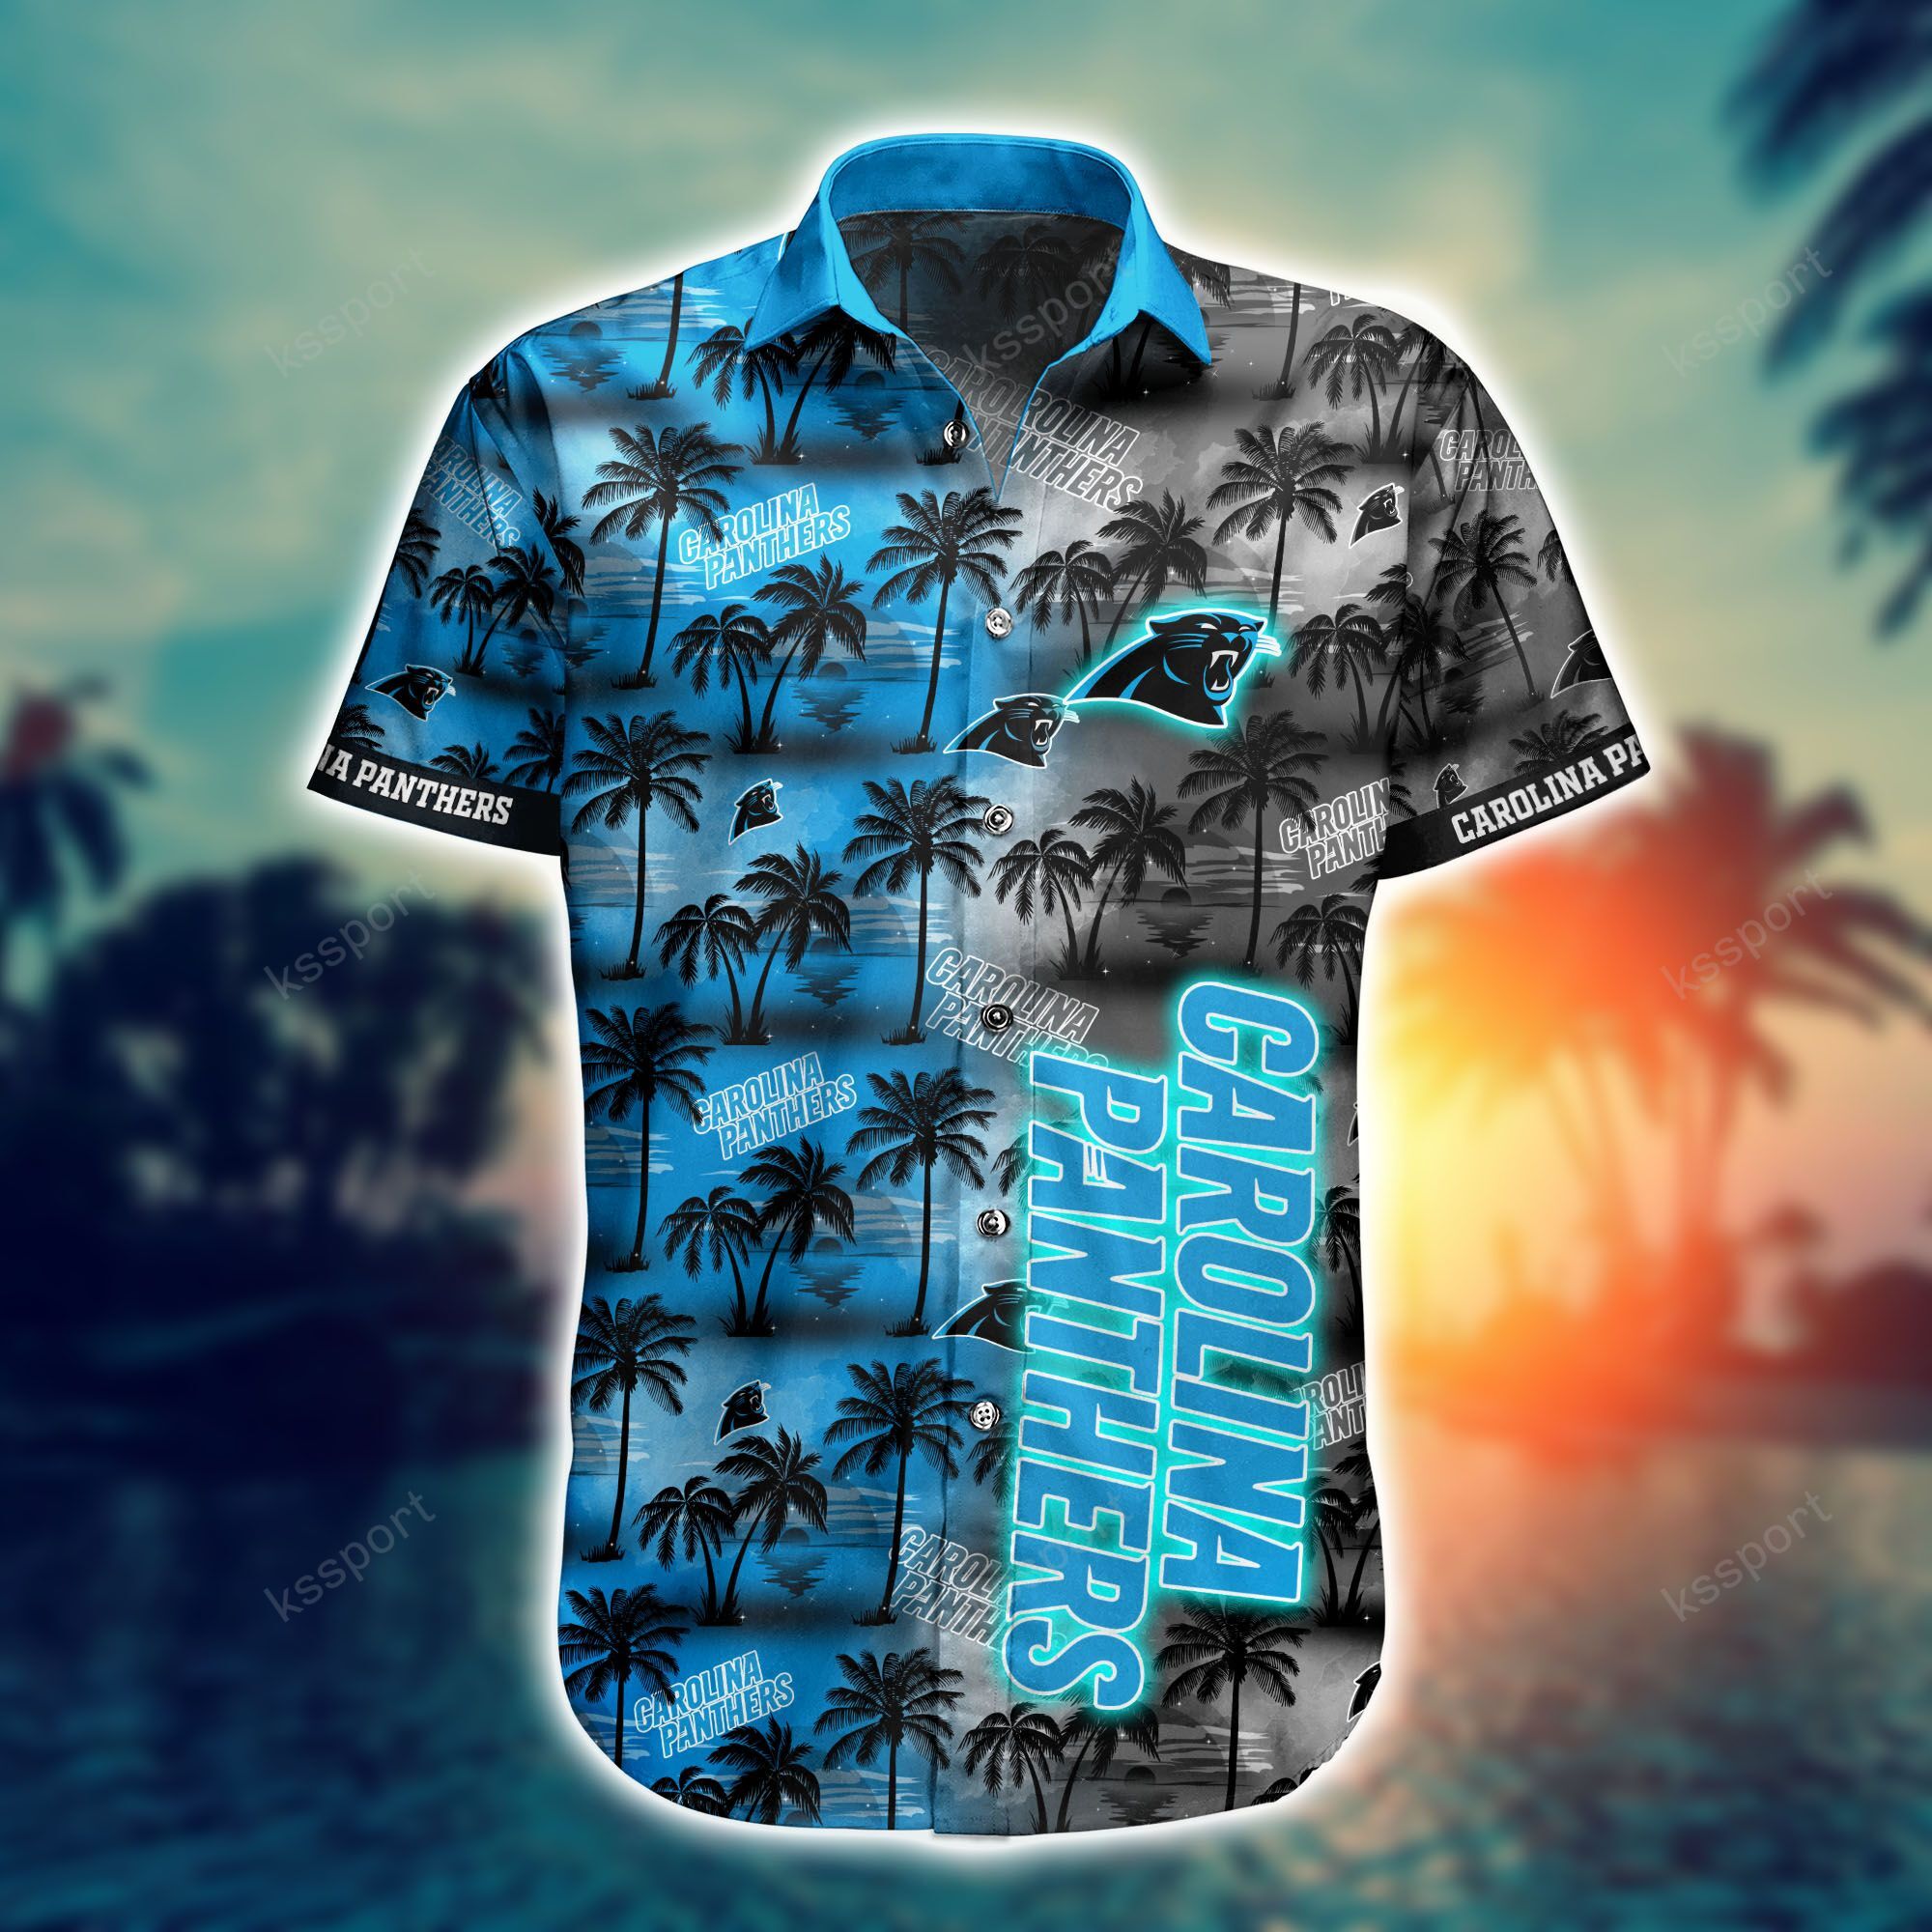 Top cool Hawaiian shirt 2022 - Make sure you get yours today before they run out! 195